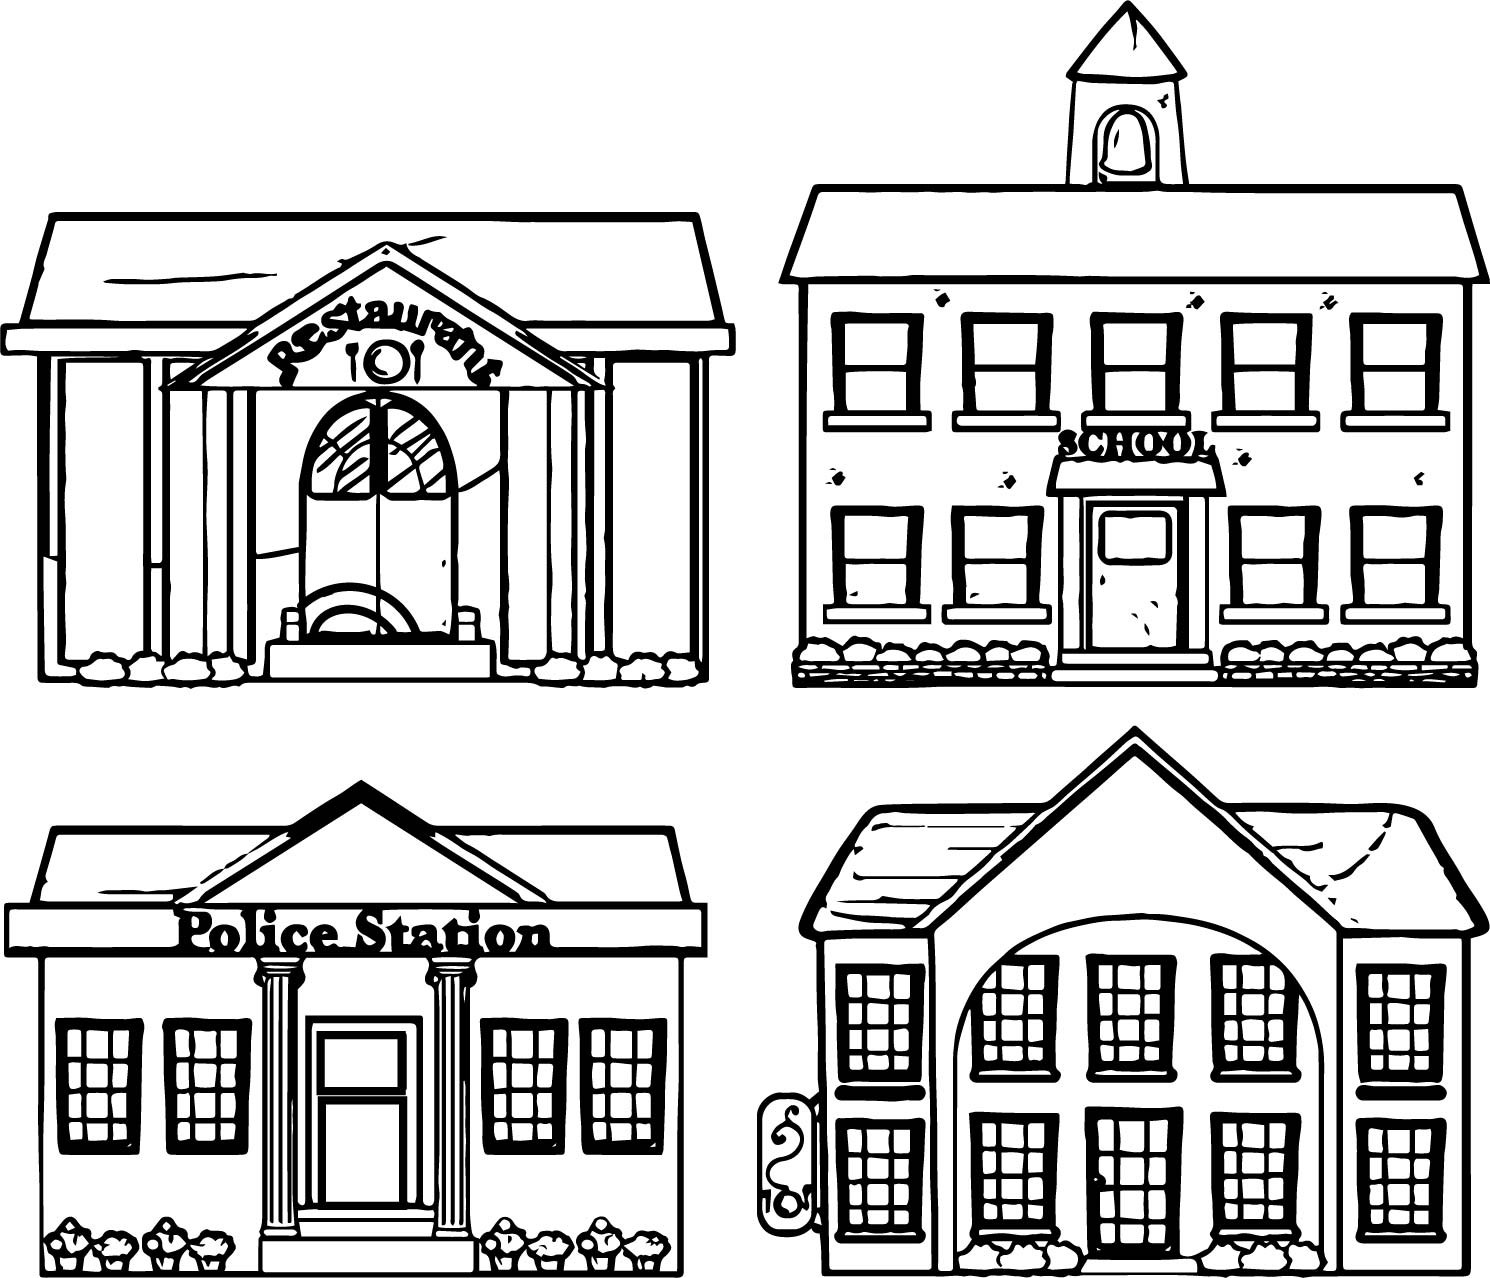 Building Coloring Pages
 Restaurant School Police Building Coloring Page